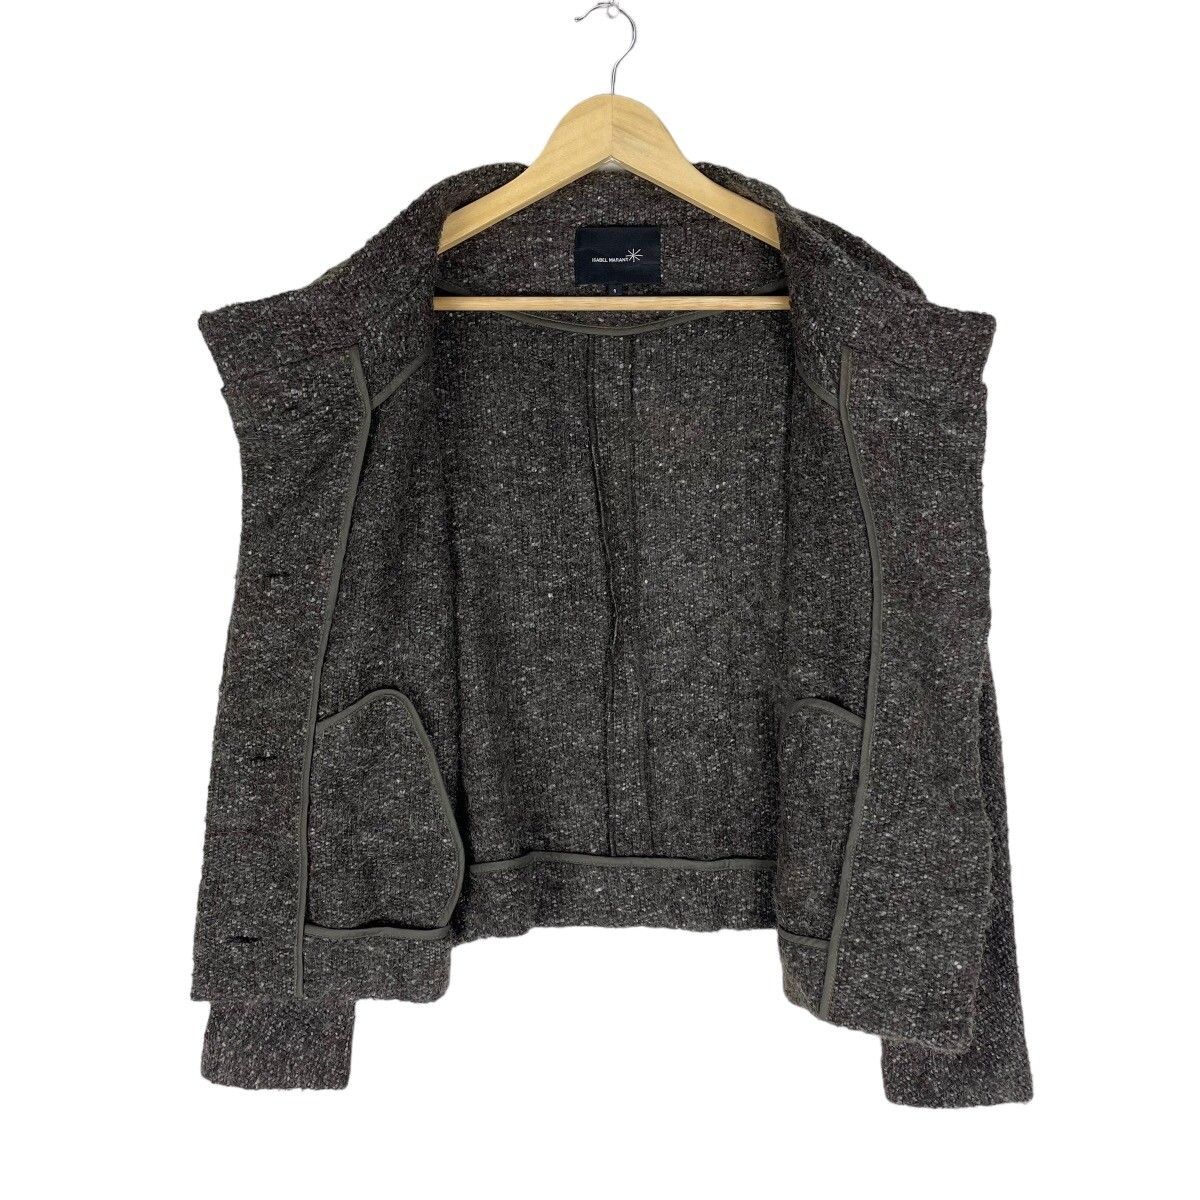 🌟ISABEL MARANT MOHAIR CROPPED BUTTON JACKET - 7